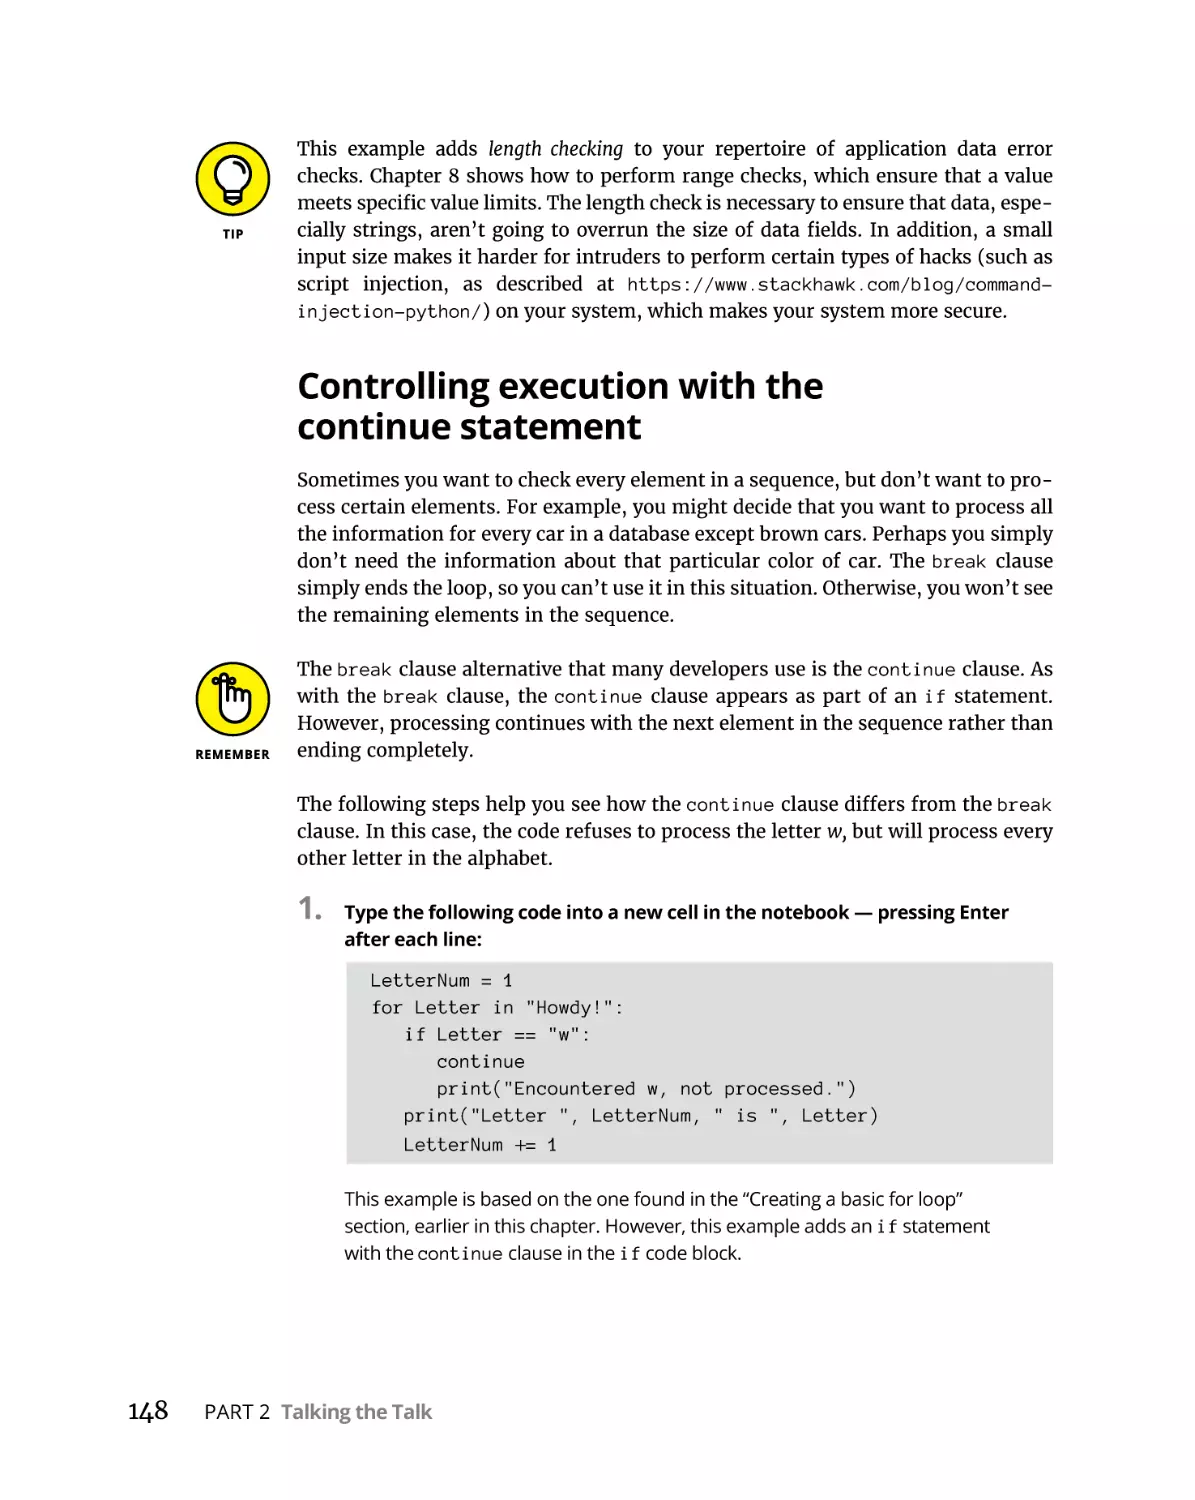 Controlling execution with the continue statement